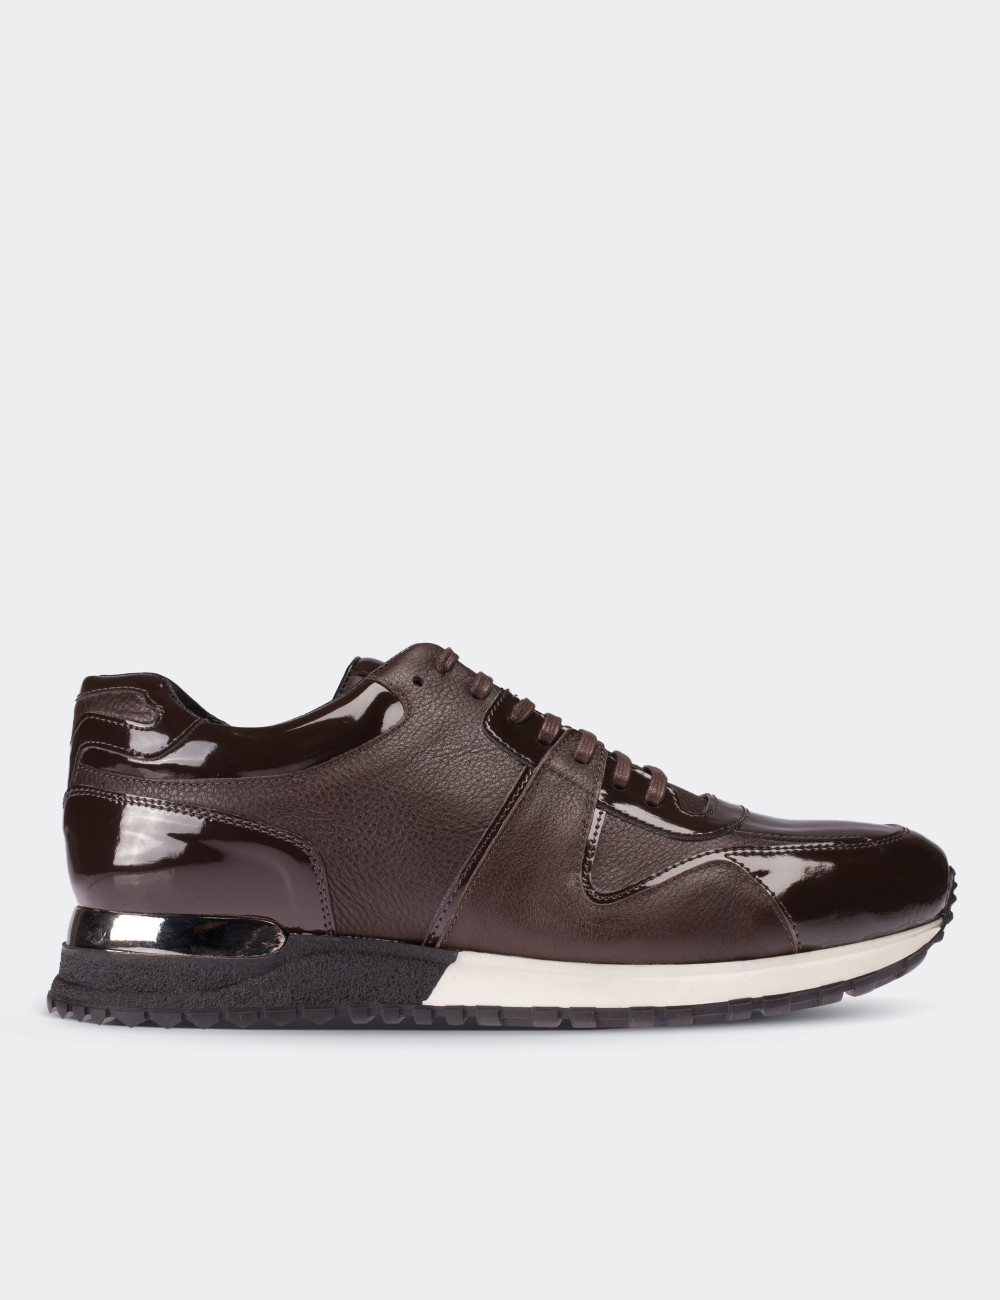 Brown Patent Leather Sneakers - 01522MKHVT01